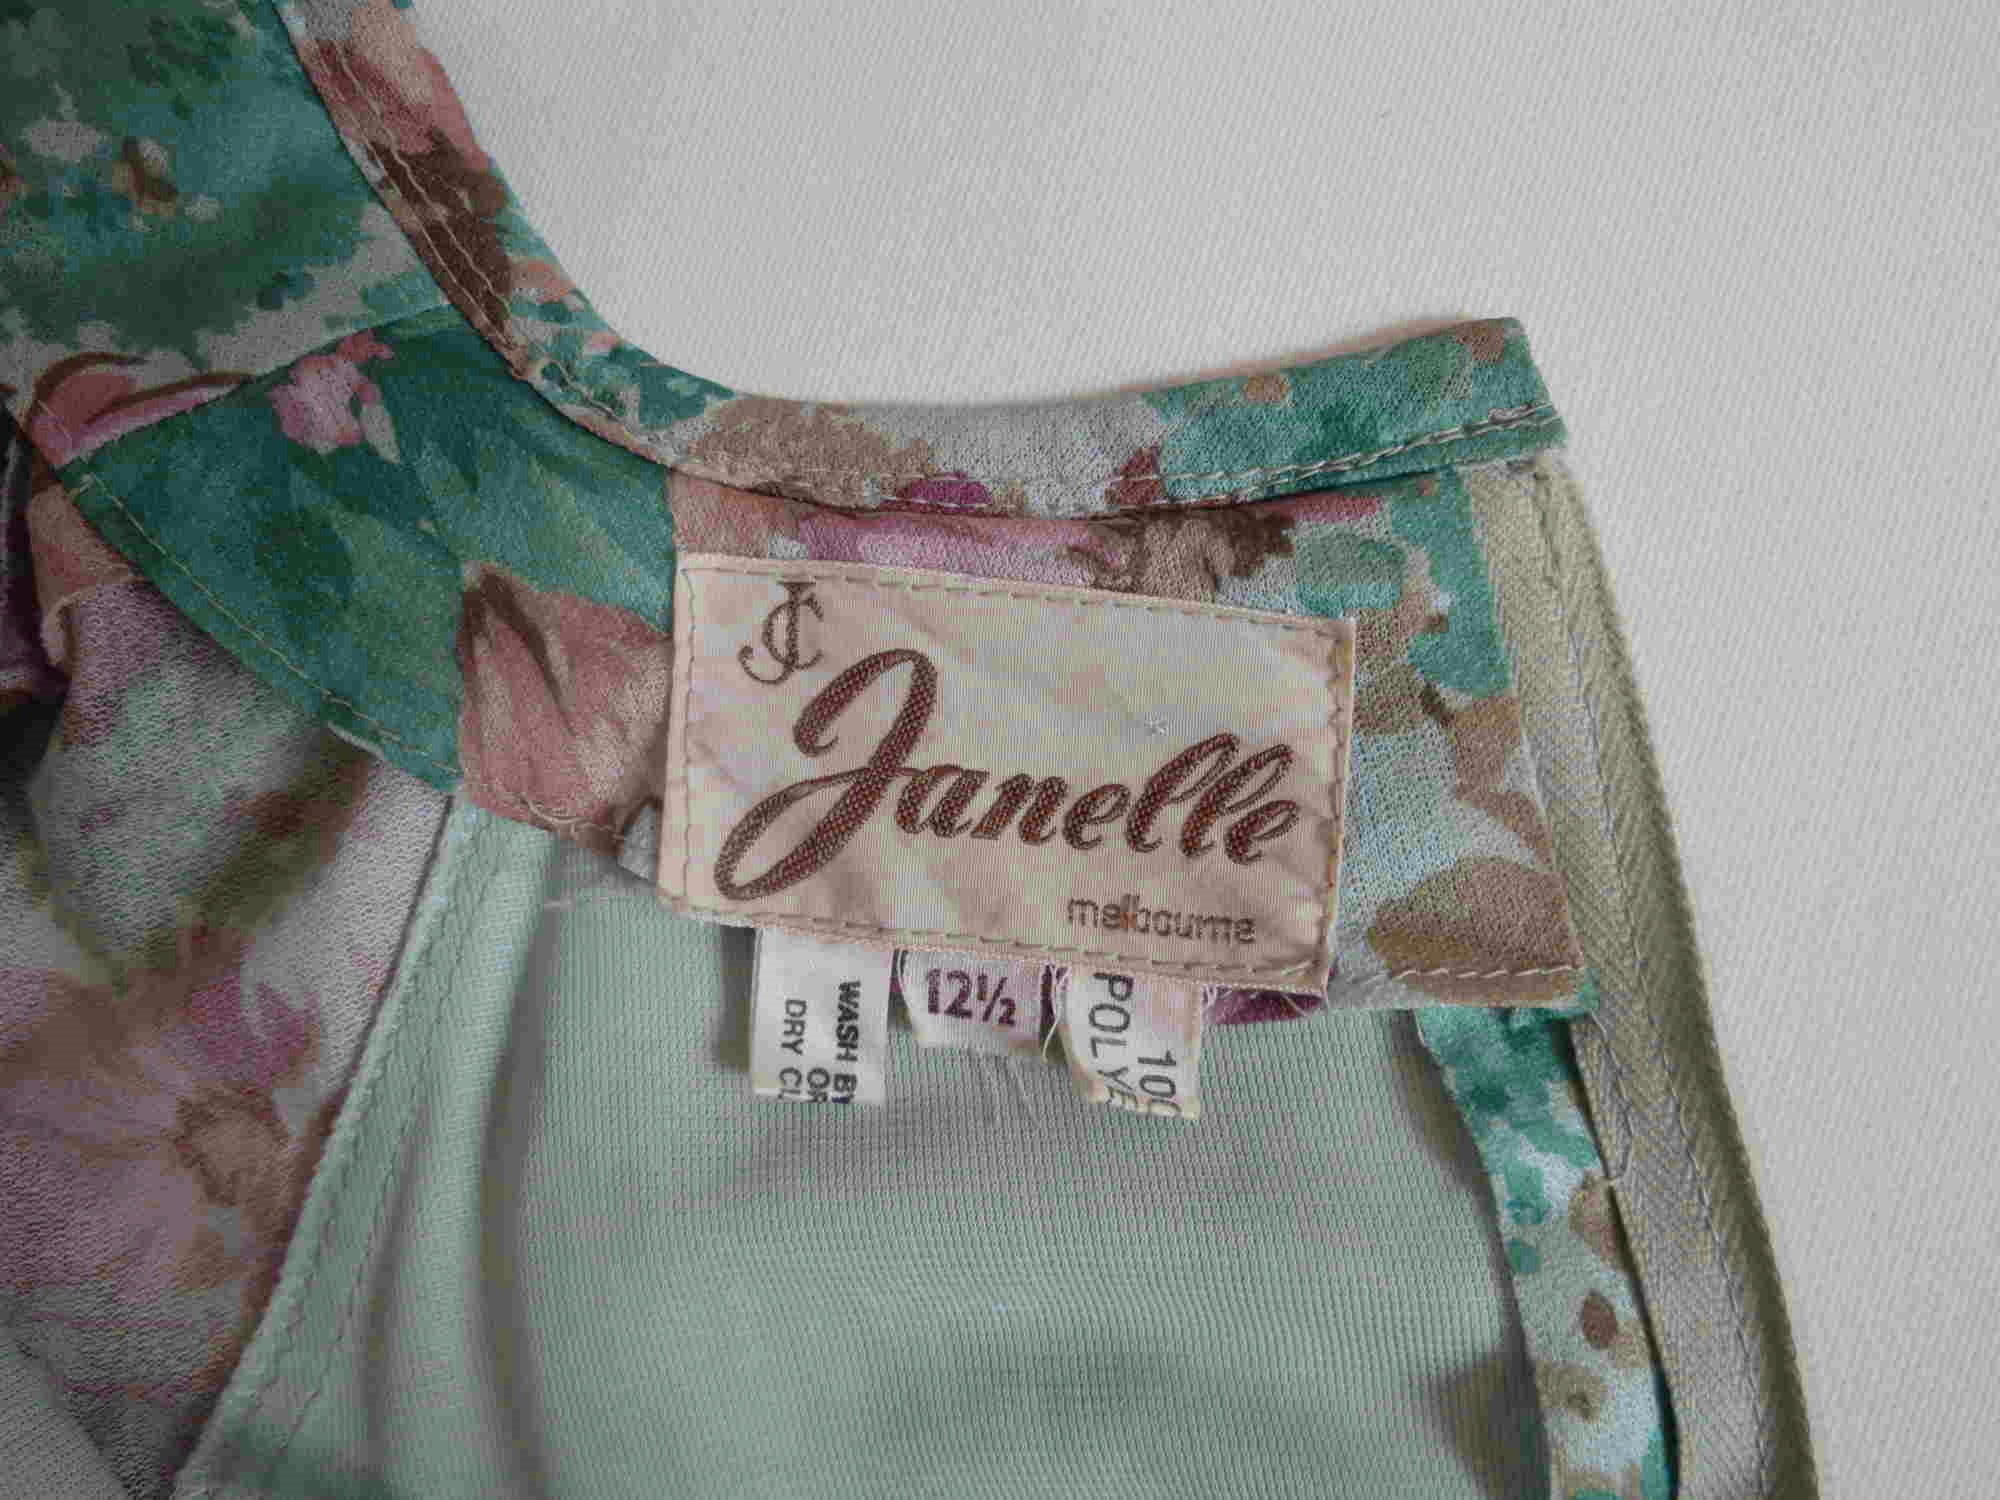 1970s vintage green floral dress with pleated skirt by janelle